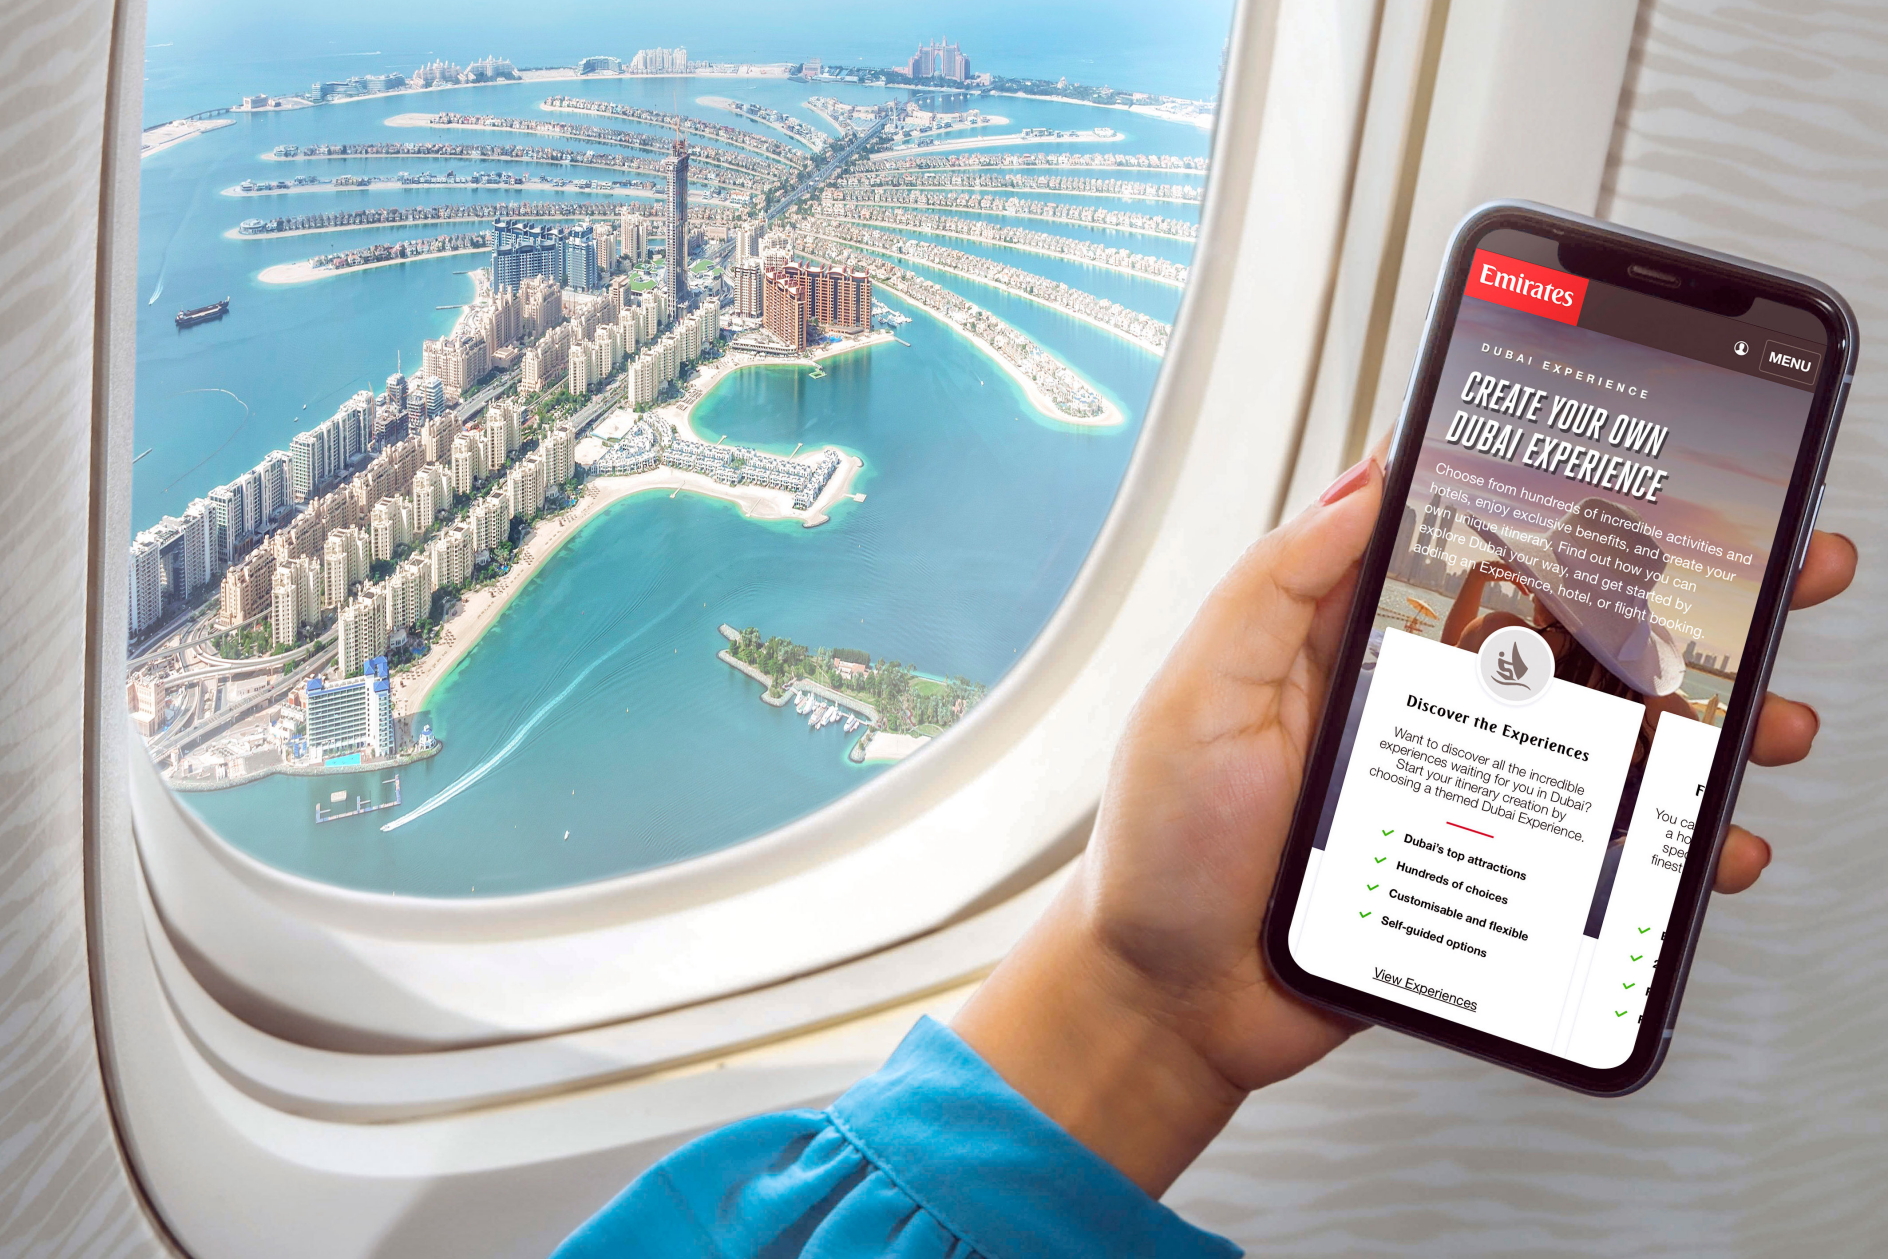 With Dubai Experience, customers can choose from pre-curated itineraries or create their own unique itineraries from scratch. Click to enlarge.